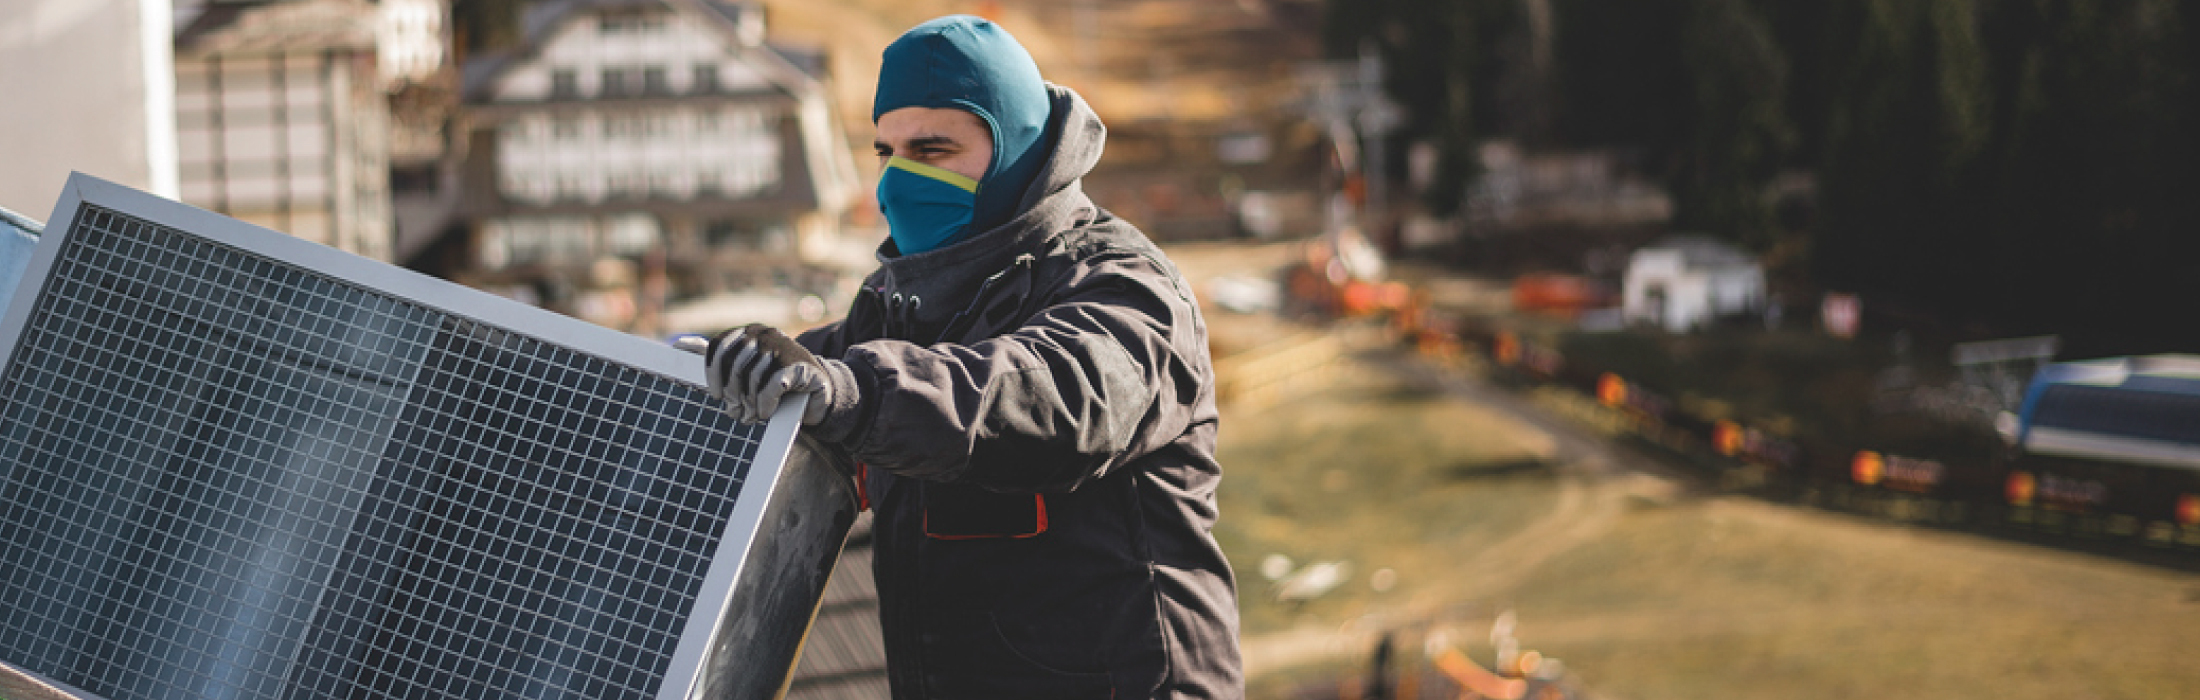 Image of HVAC tech working in the cold outside